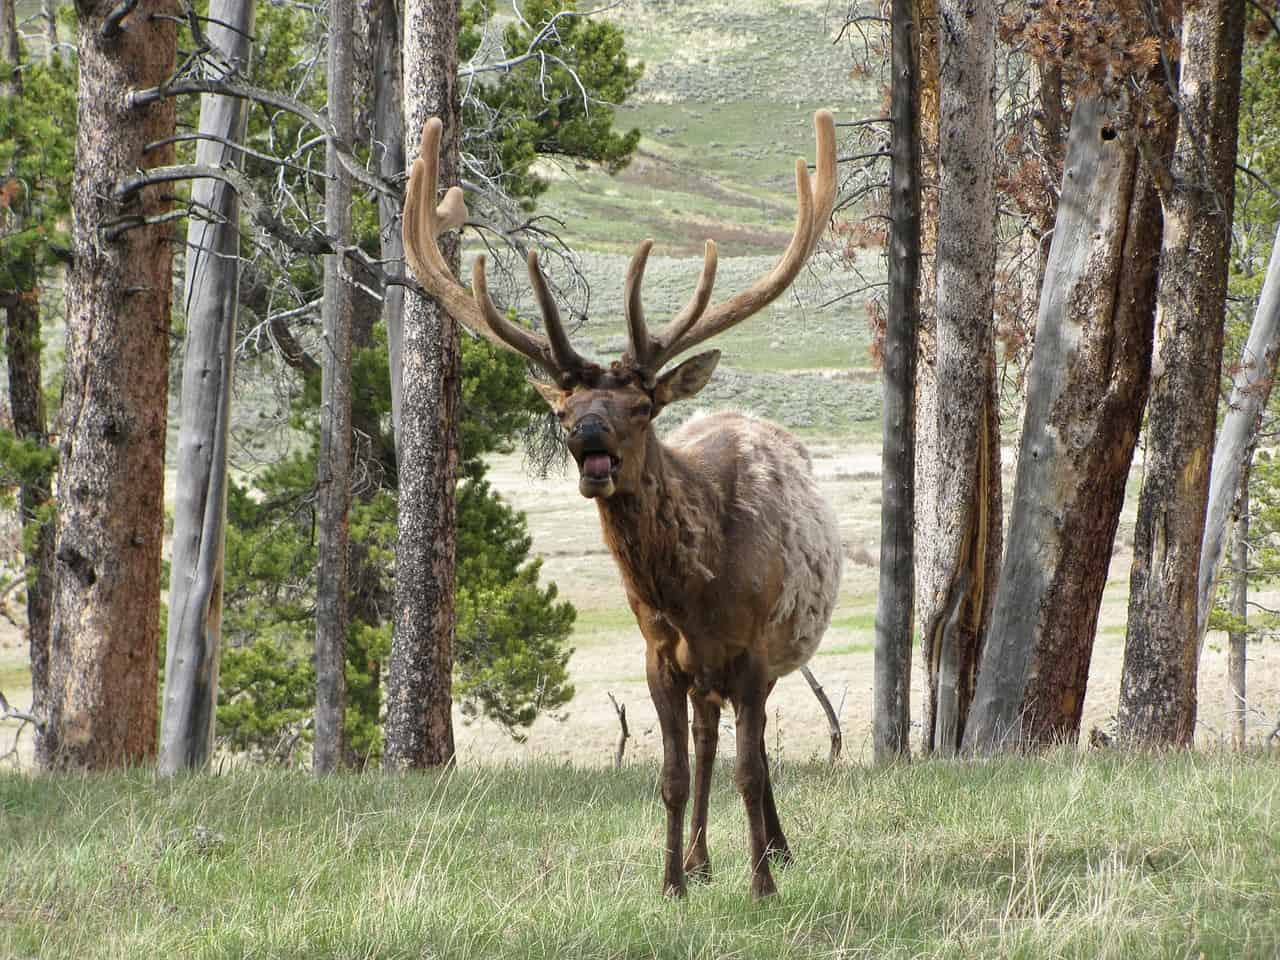 Elk is a popular subject of hunting